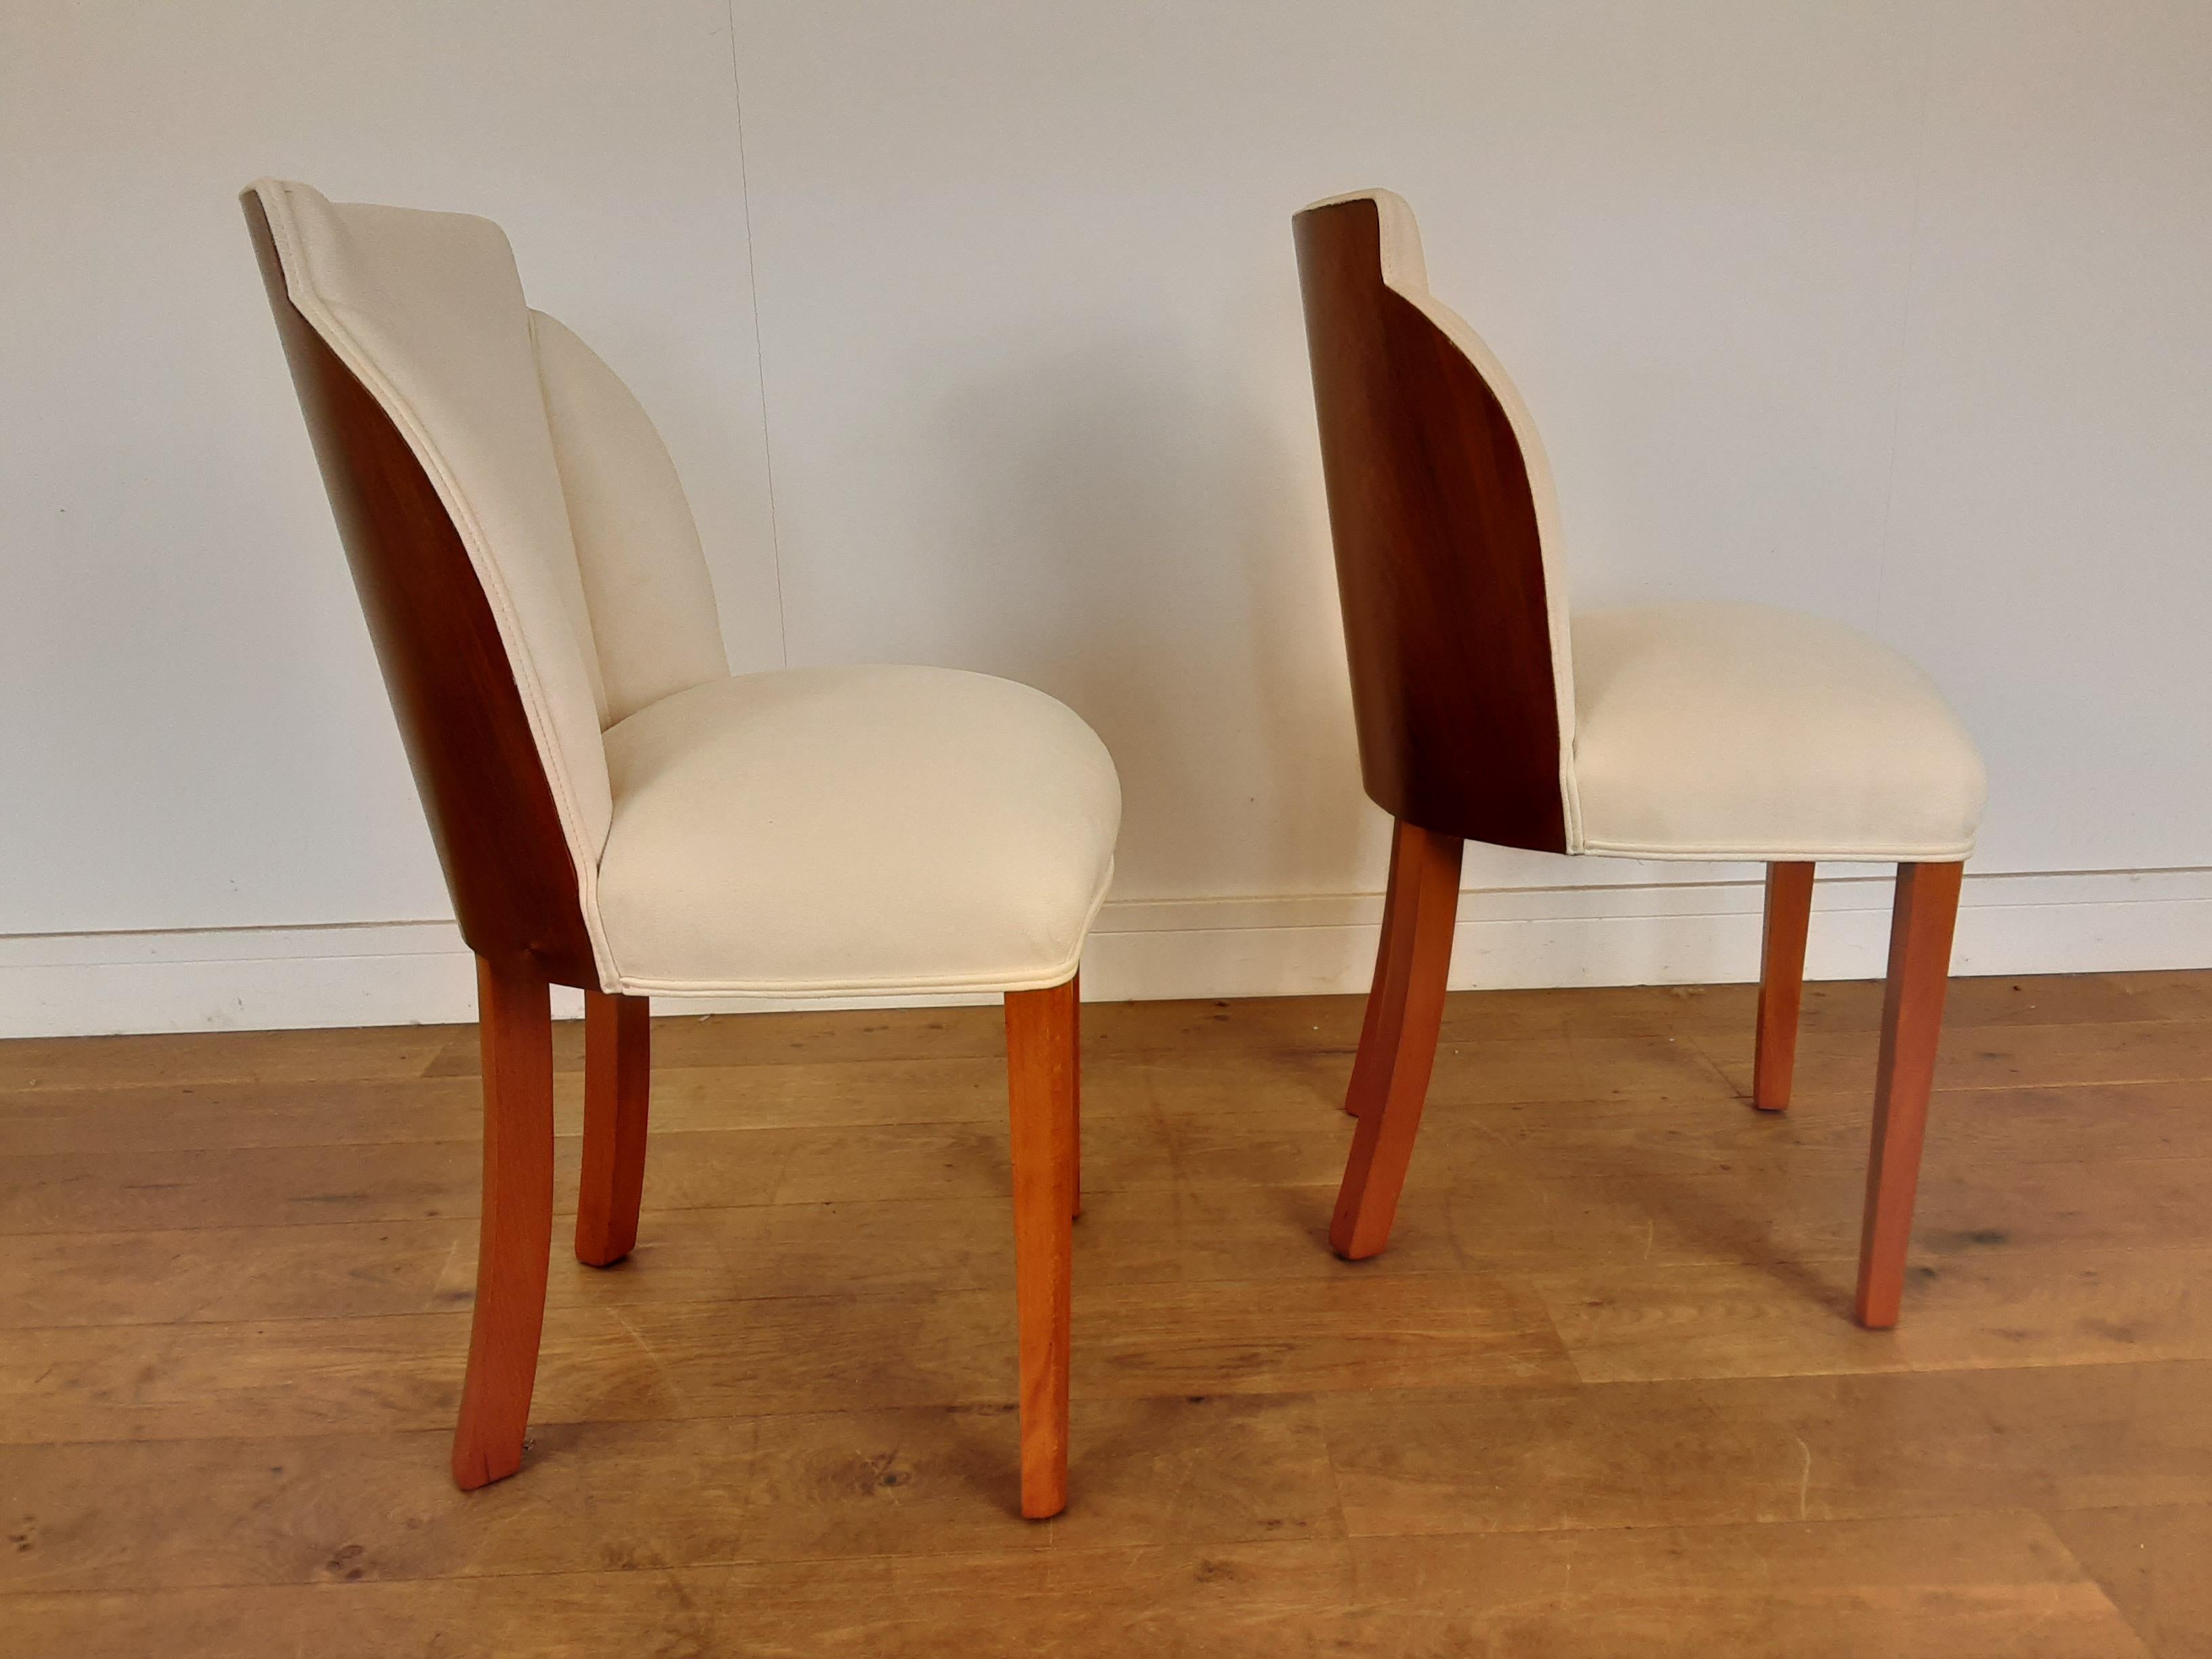 British Pair of Art Deco Cloud Back Chairs in Walnut by Epstein, circa 1930 For Sale